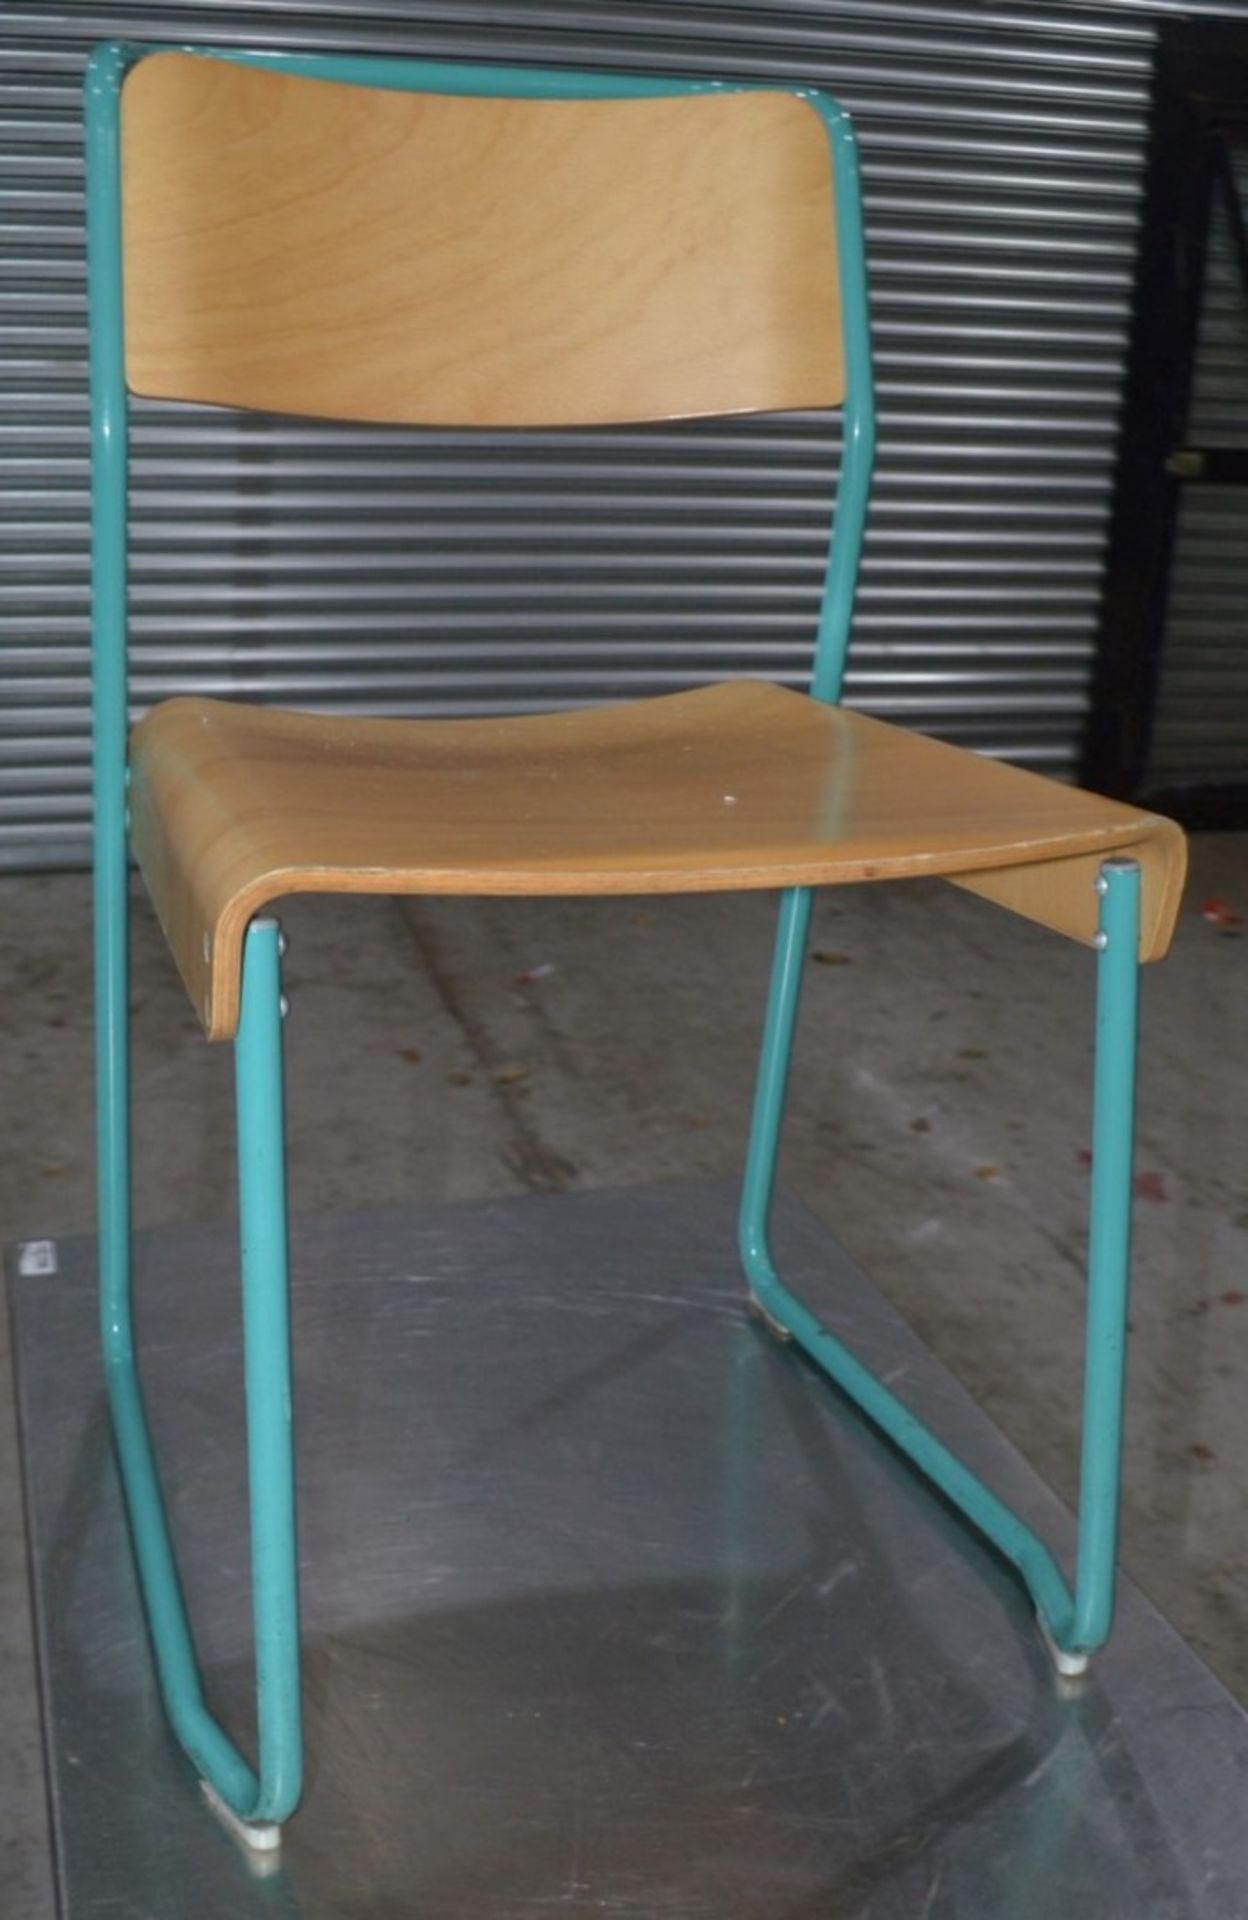 6 x Contemporary Stackable Bistro / Bar Chairs With Metal Frames With Curved Vanished Wooden Seats - Image 8 of 12